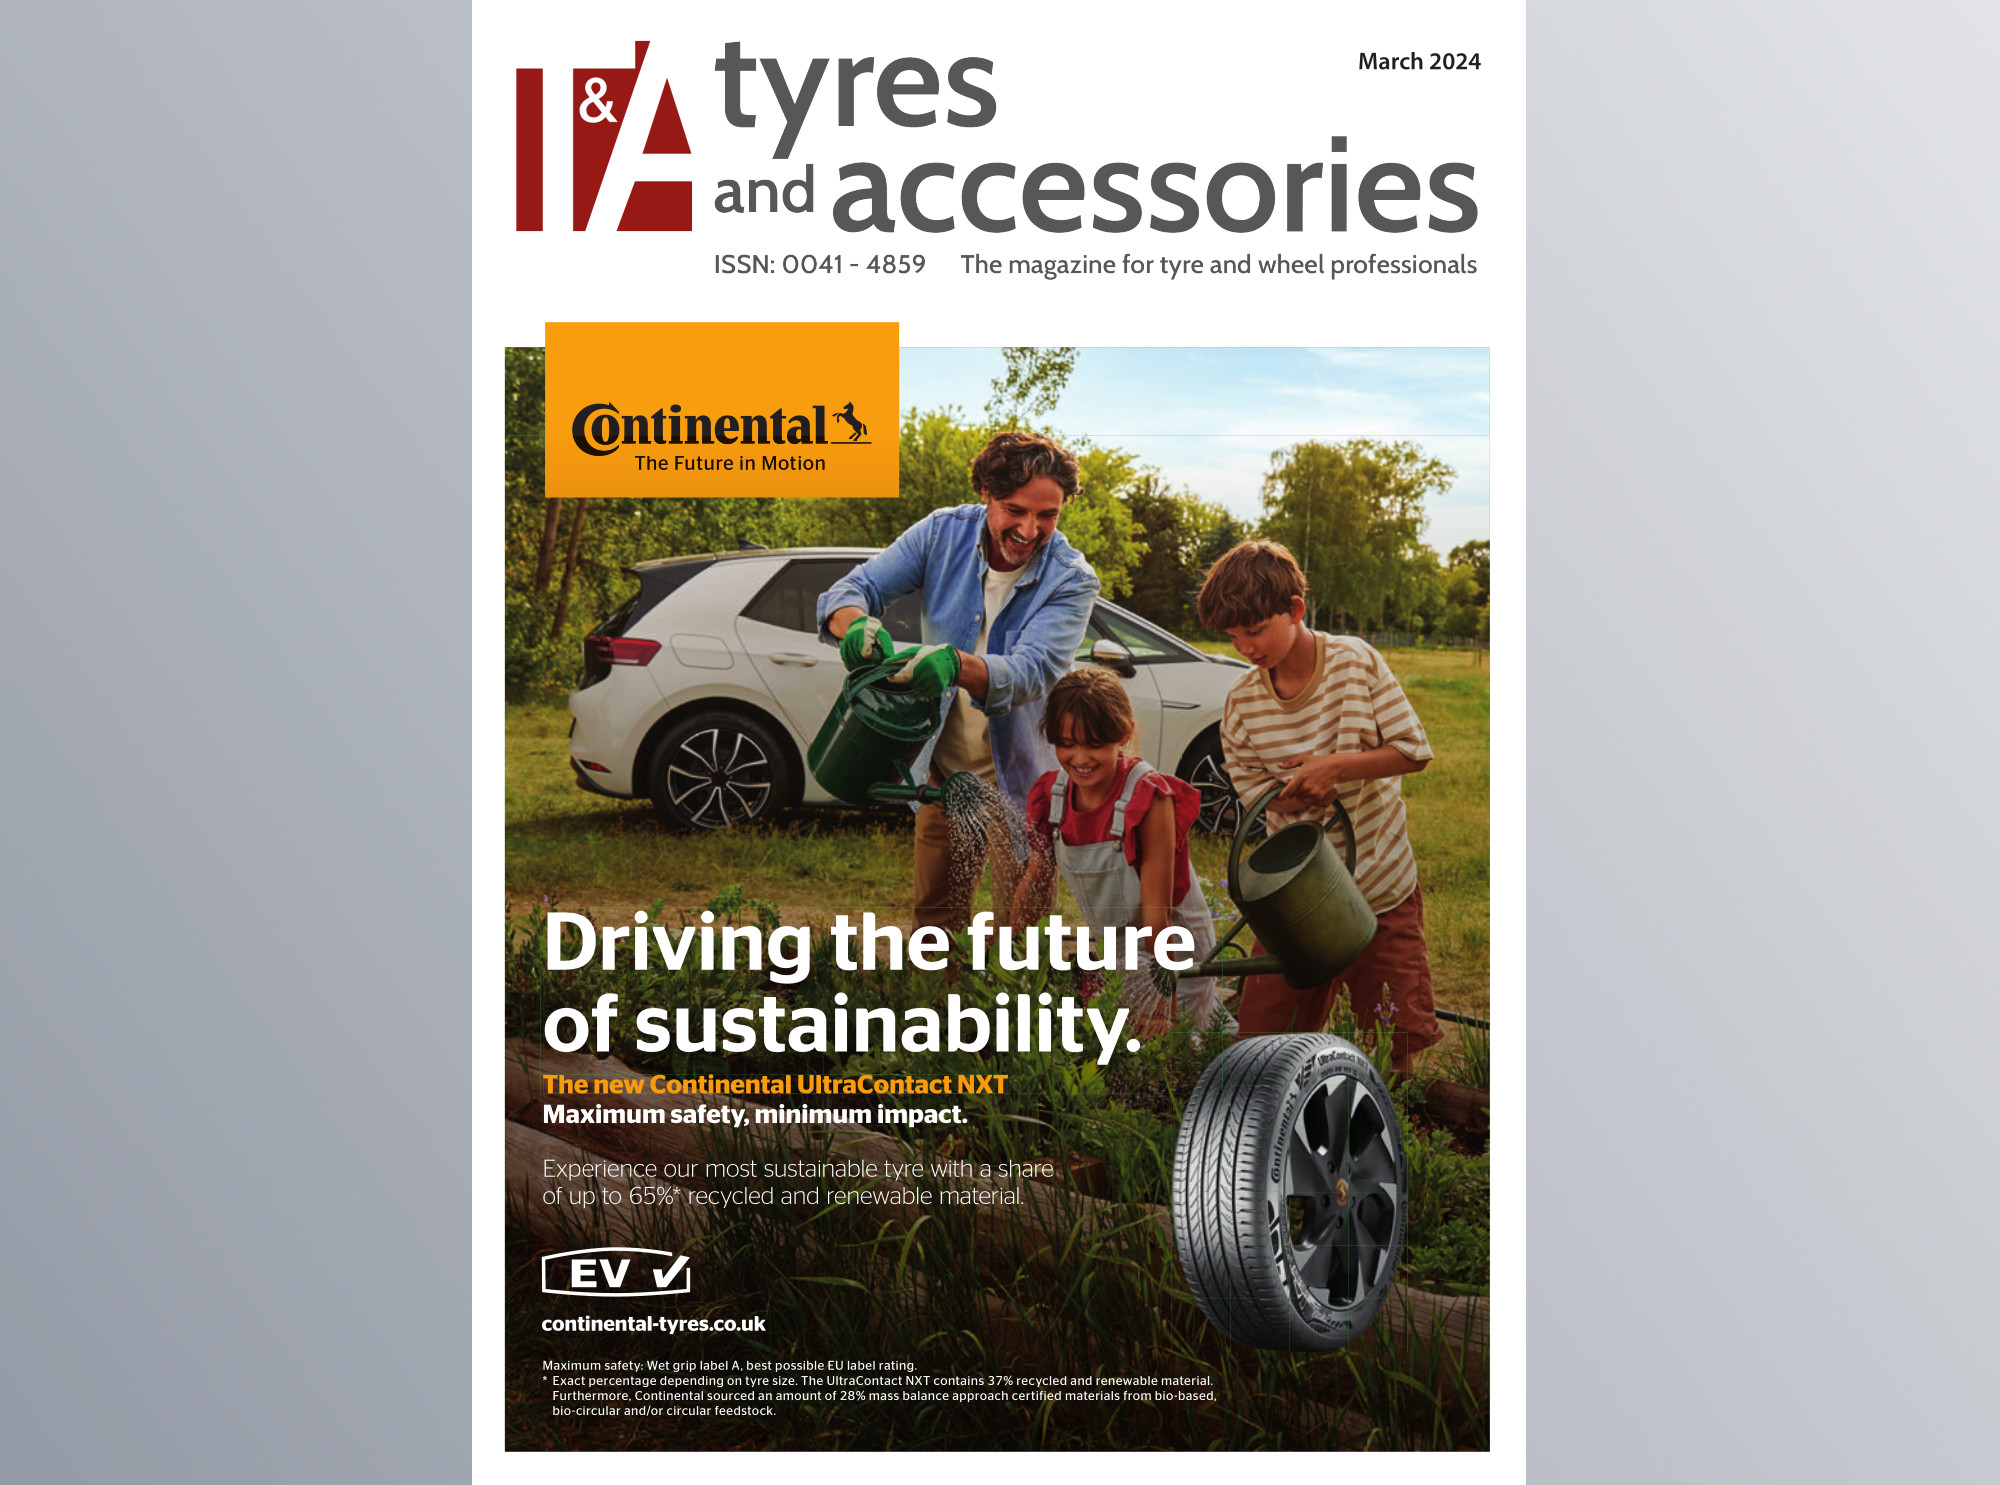 Read and download Tyres & Accessories March 2024 now